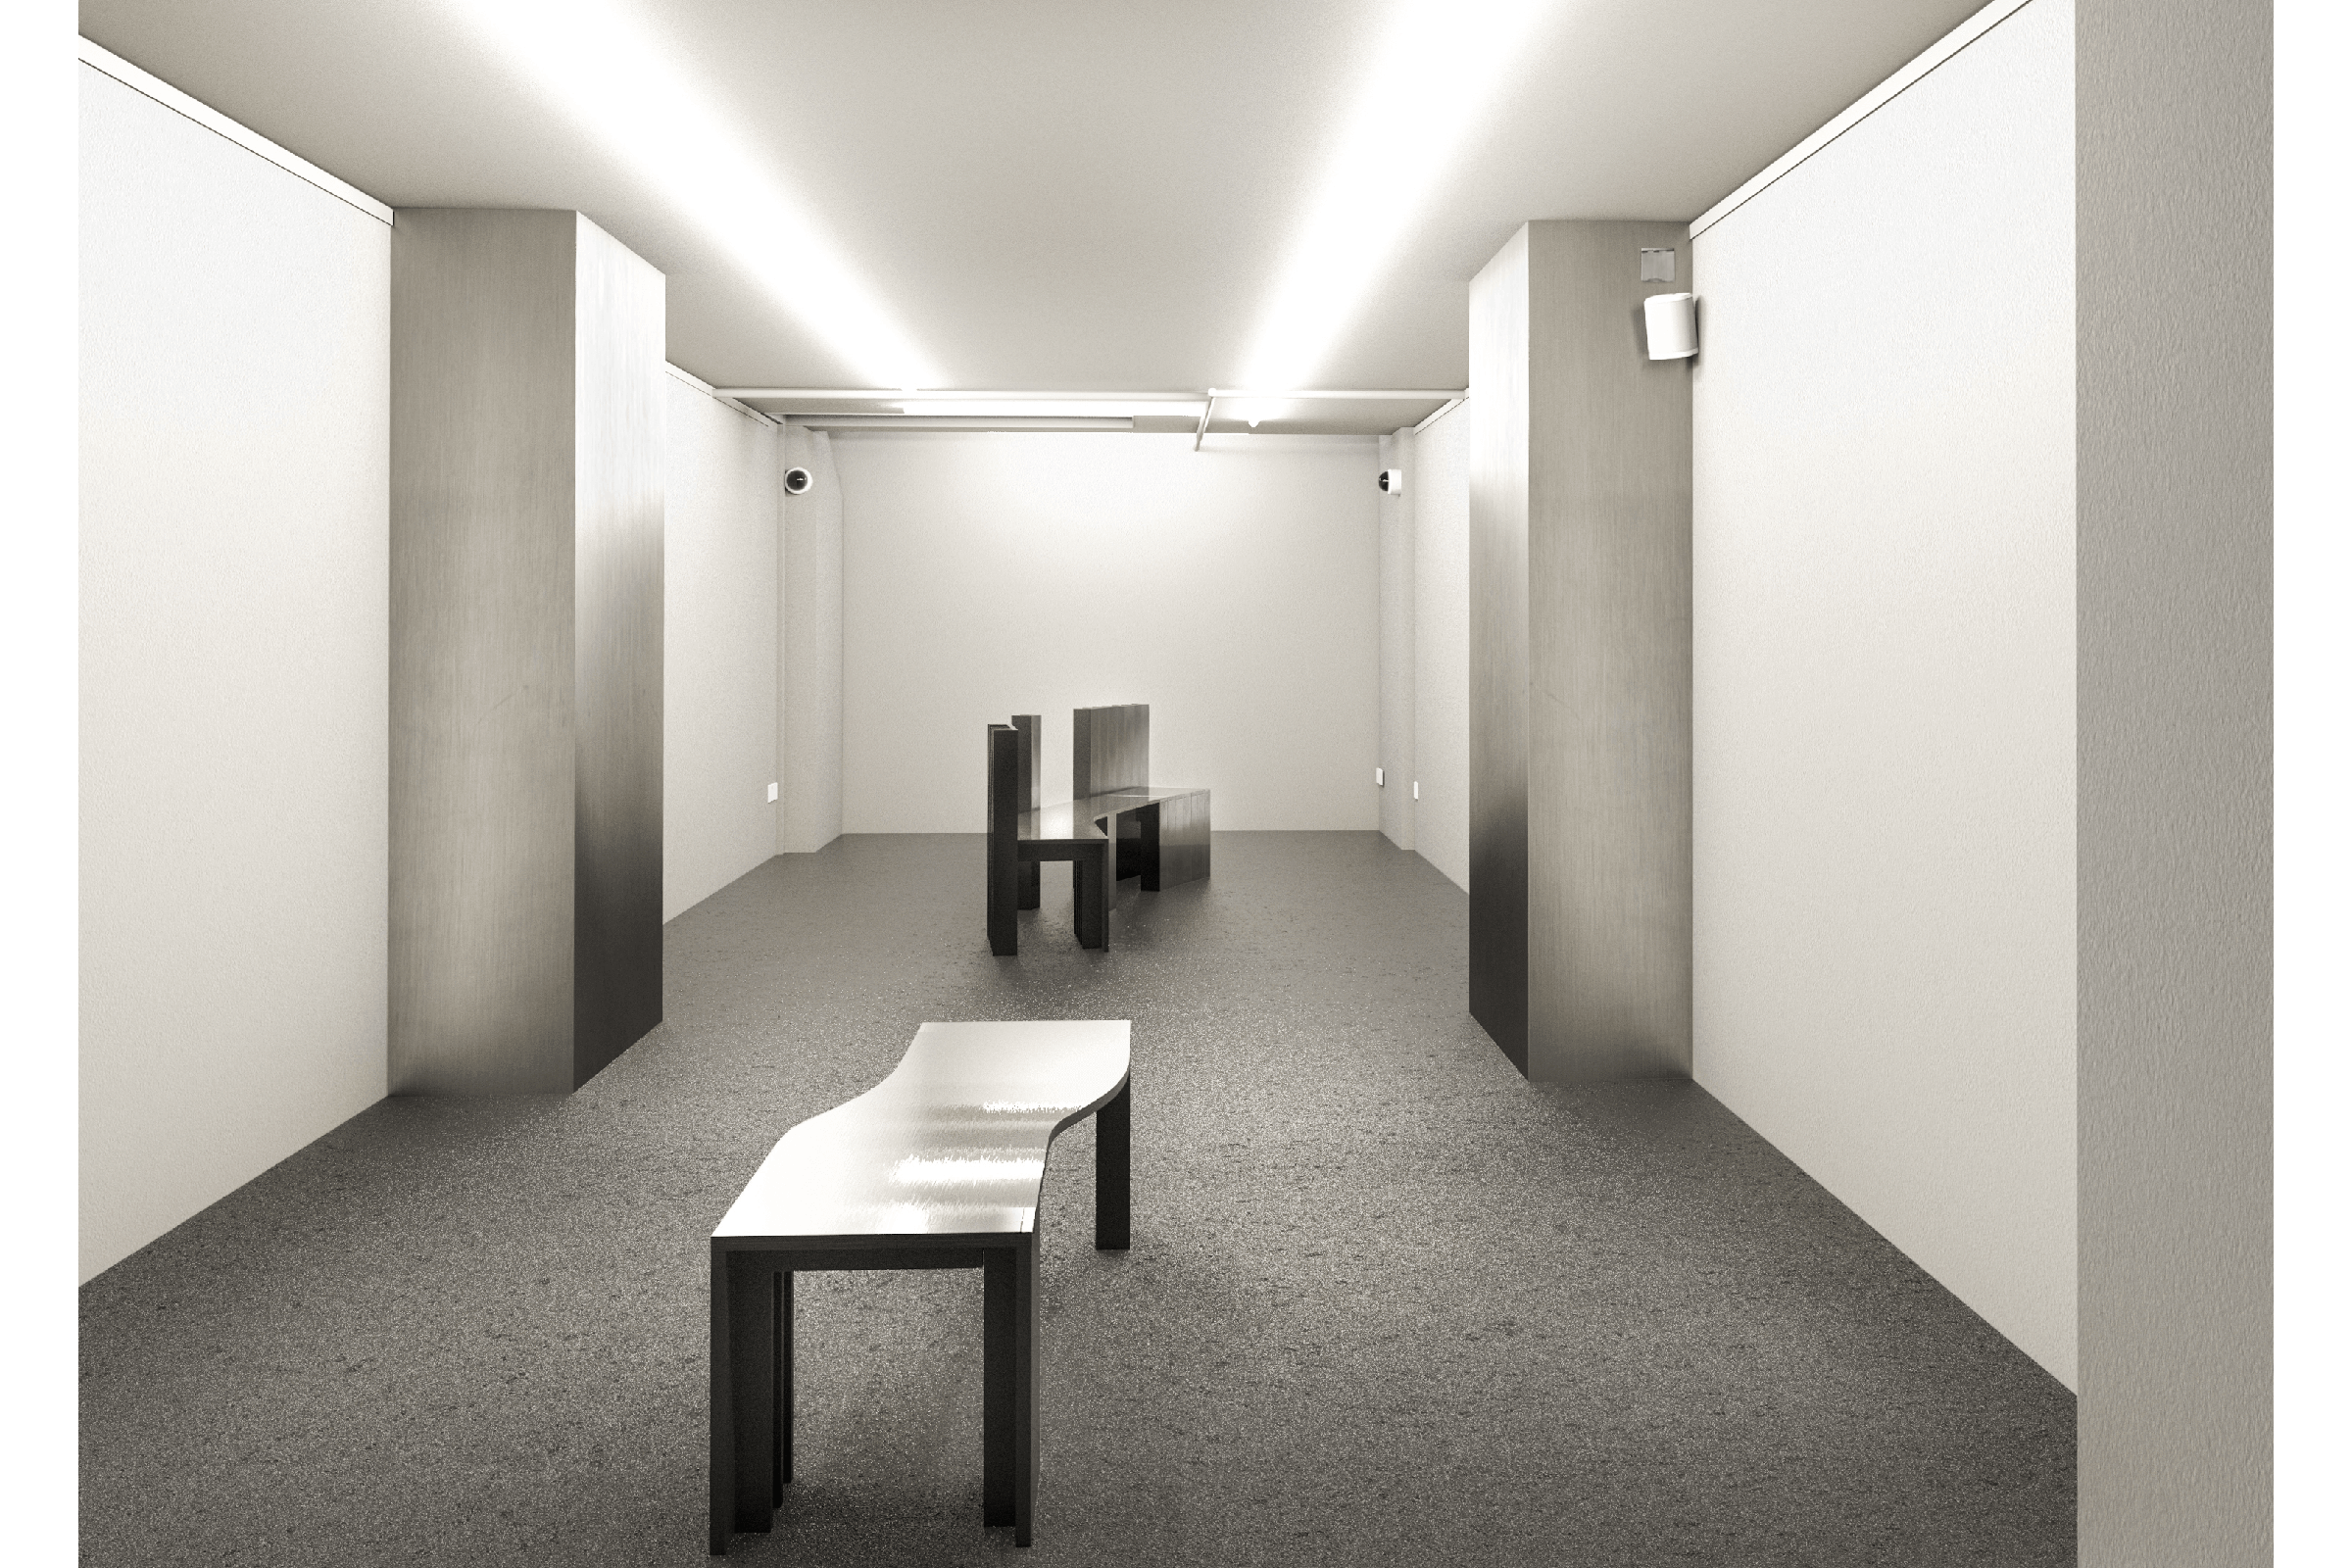 Boring Gallery Render with Stainless Steel Benches by Jacklyn Pappalardo